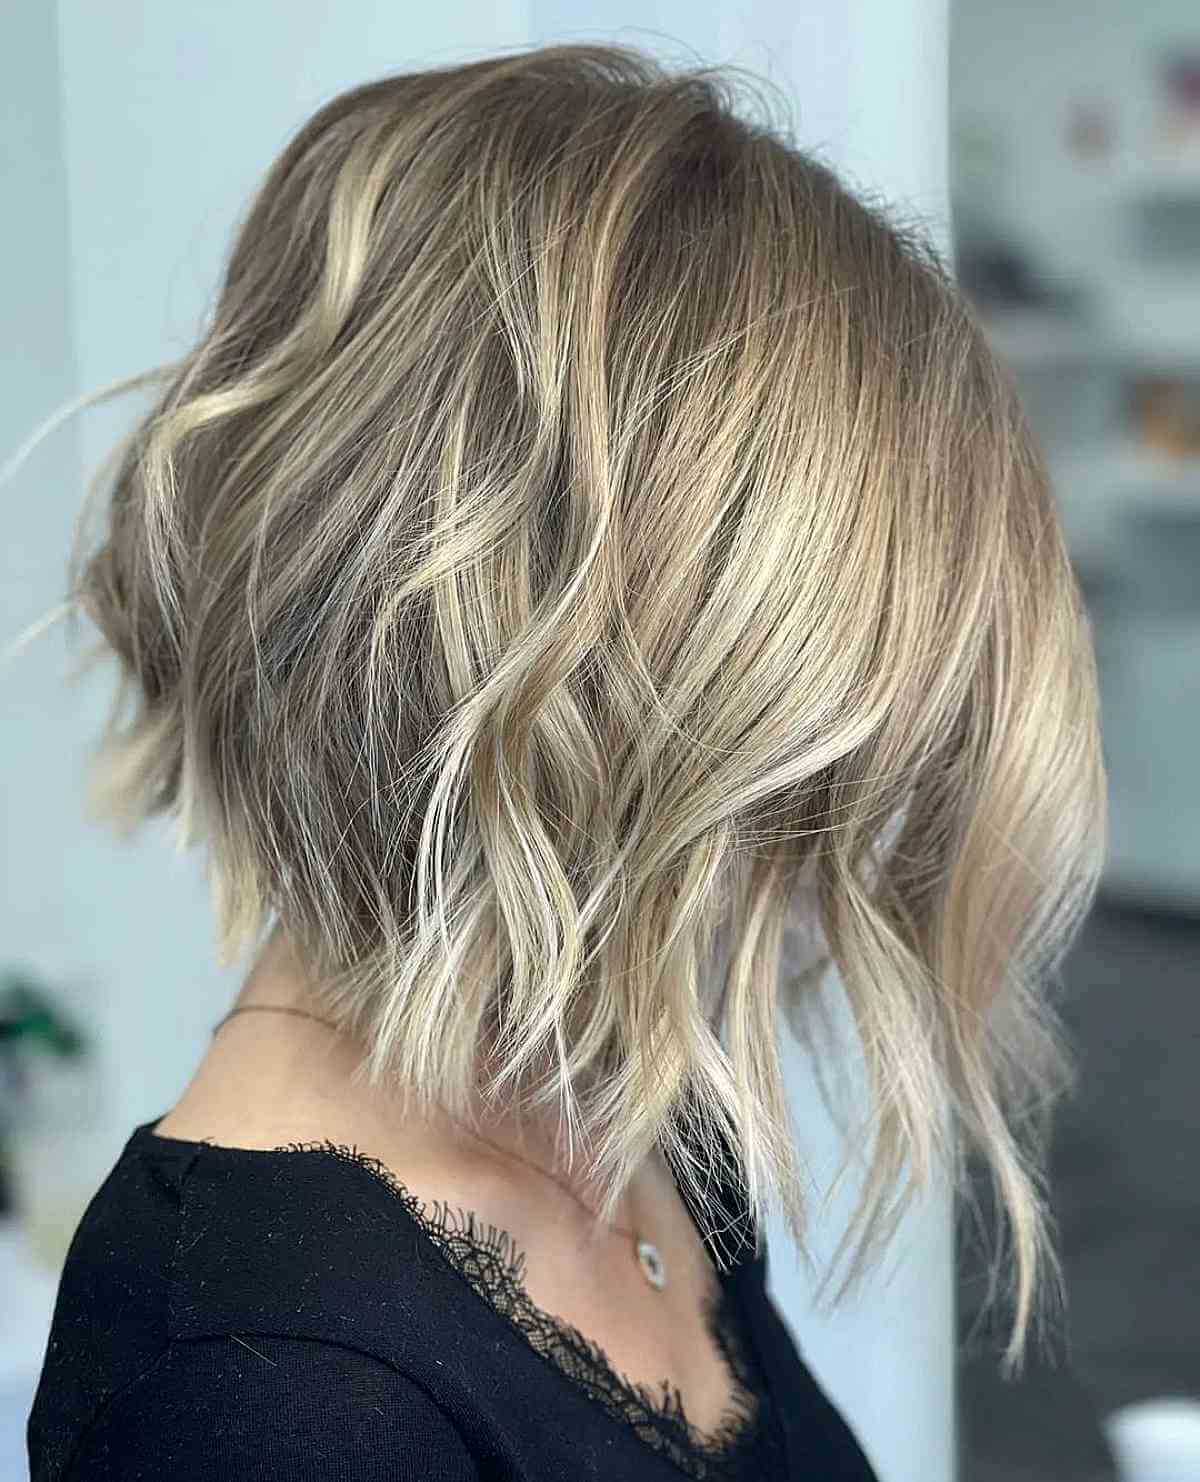 Long Inverted Bob with Textured Ends for Short Thick Hair